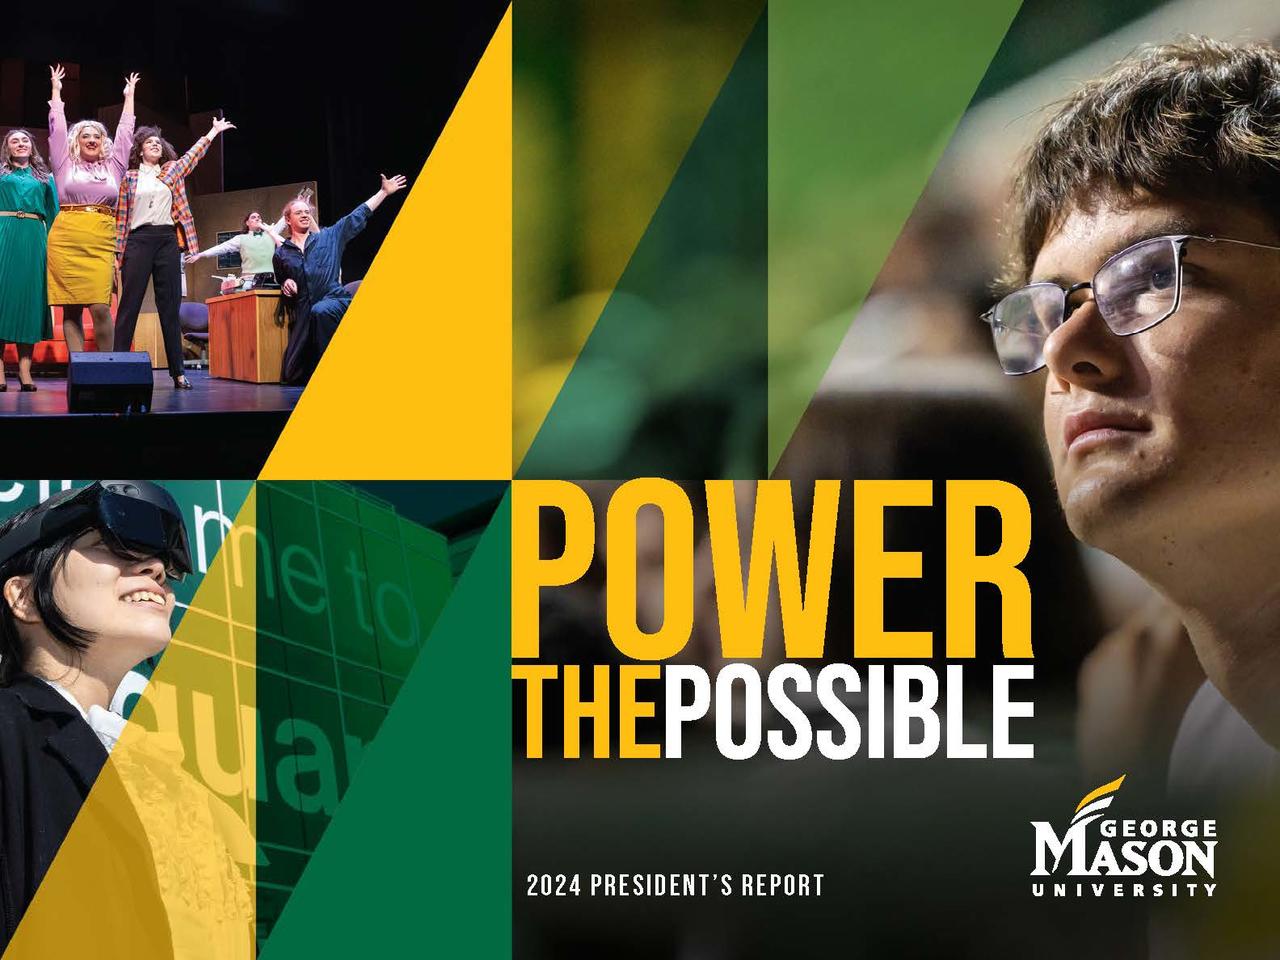 The cover of the 2024 President's Report from George Mason University. The title reads "Power the Possible" with images of students acting in a play, a student in a VR headset, and a student looking thoughtfully at the sky.